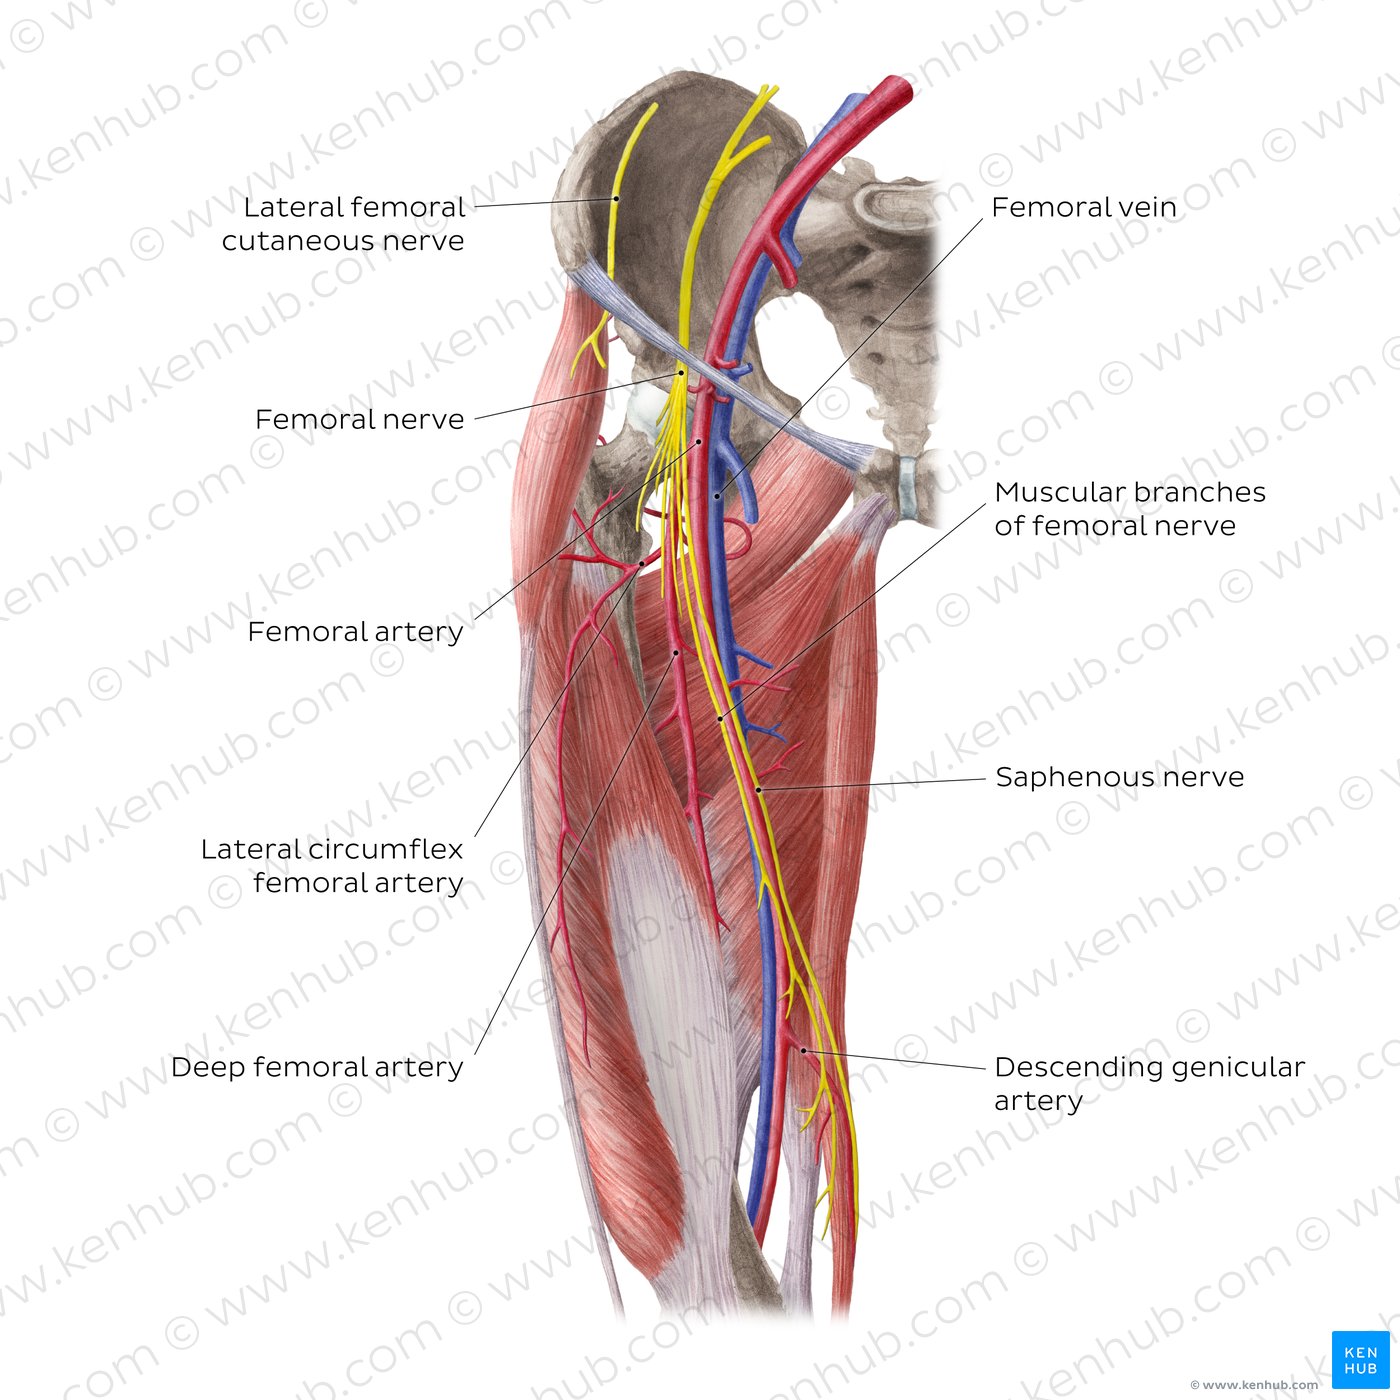 Arteries and nerves of the hip and thigh (anterior view)